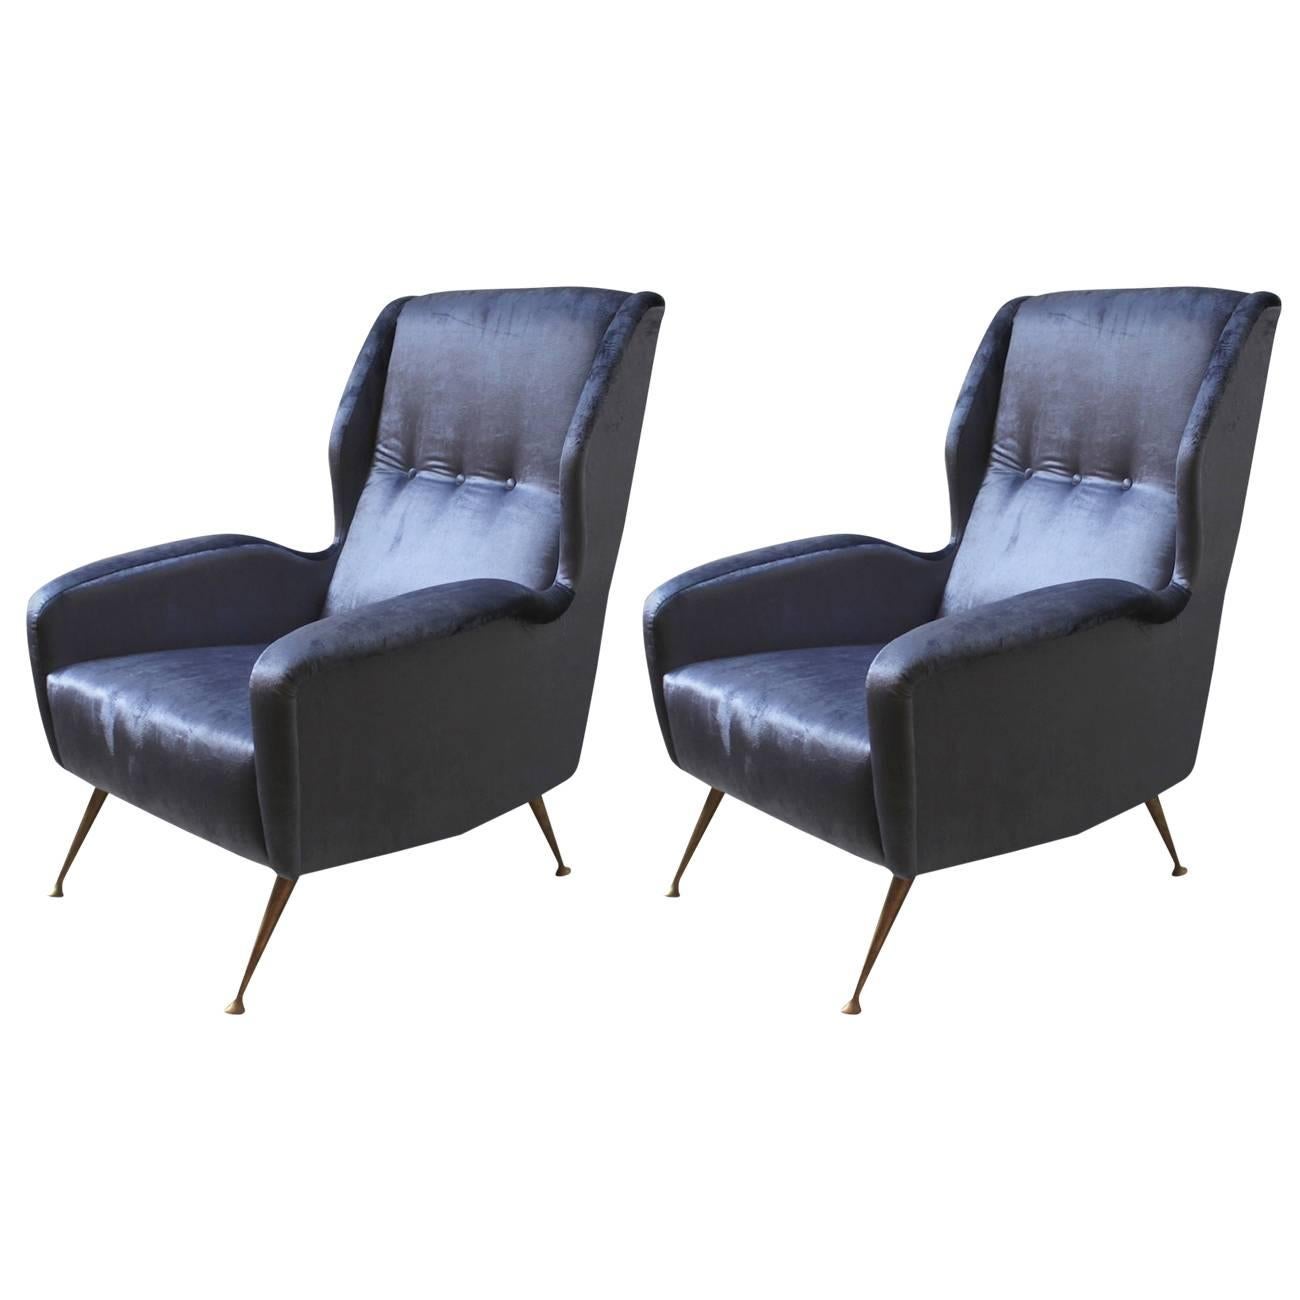 Pair of 1950s Italian Armchairs For Sale